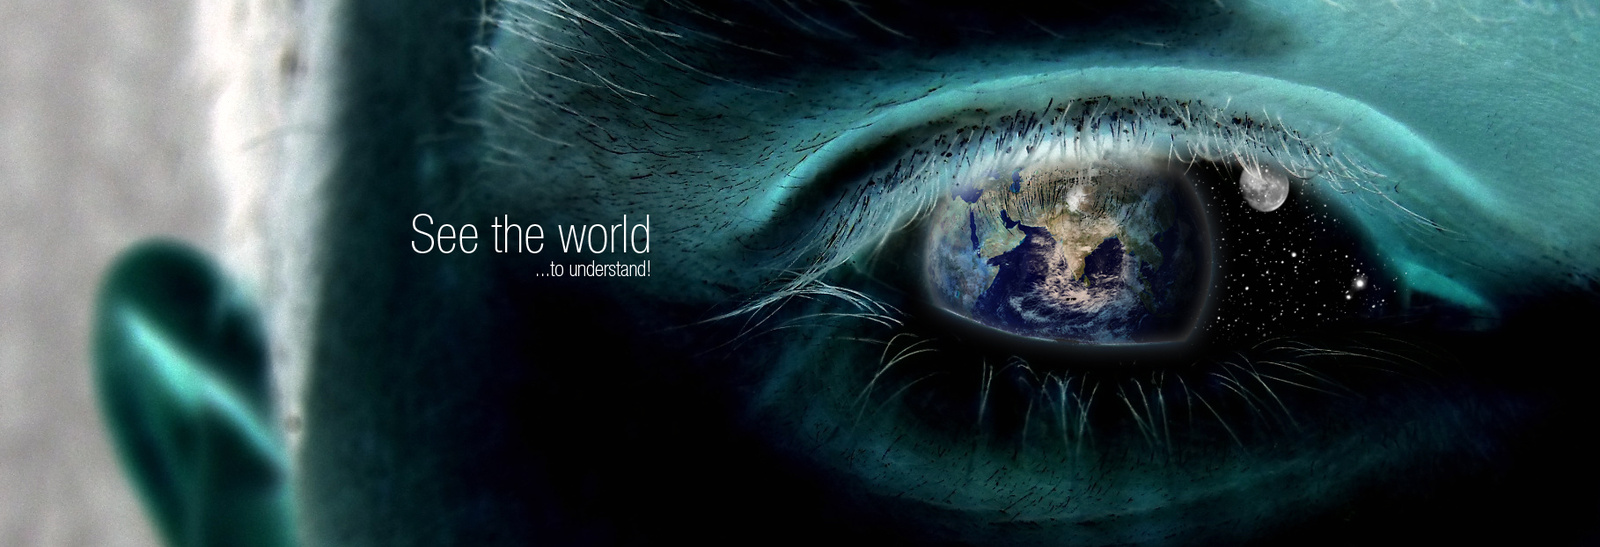 See the world...